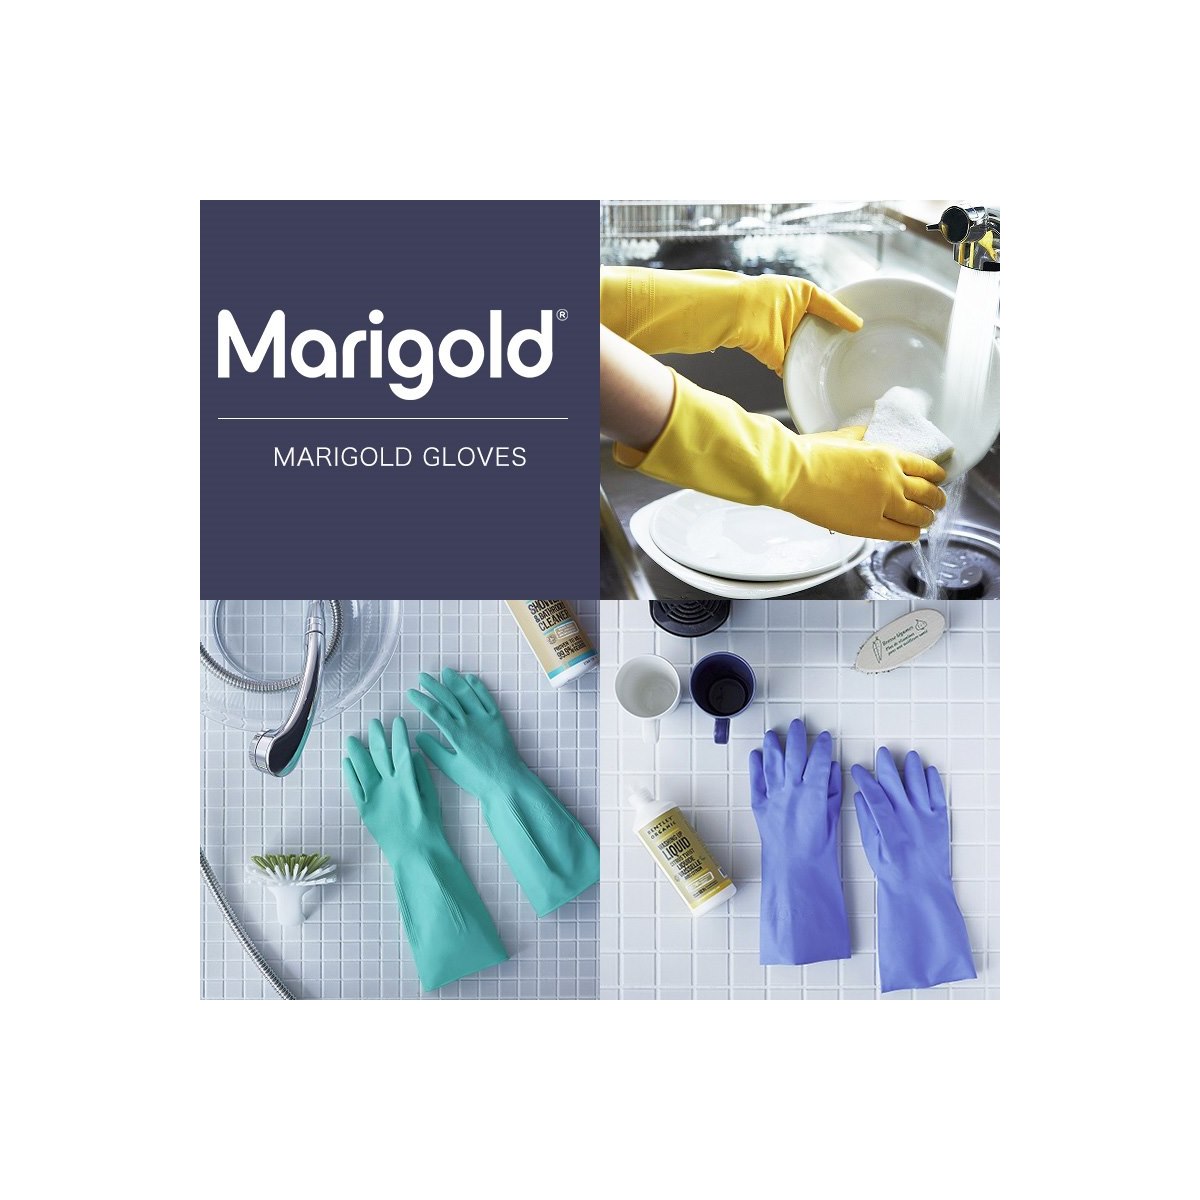 Where to Buy Marigold Gloves